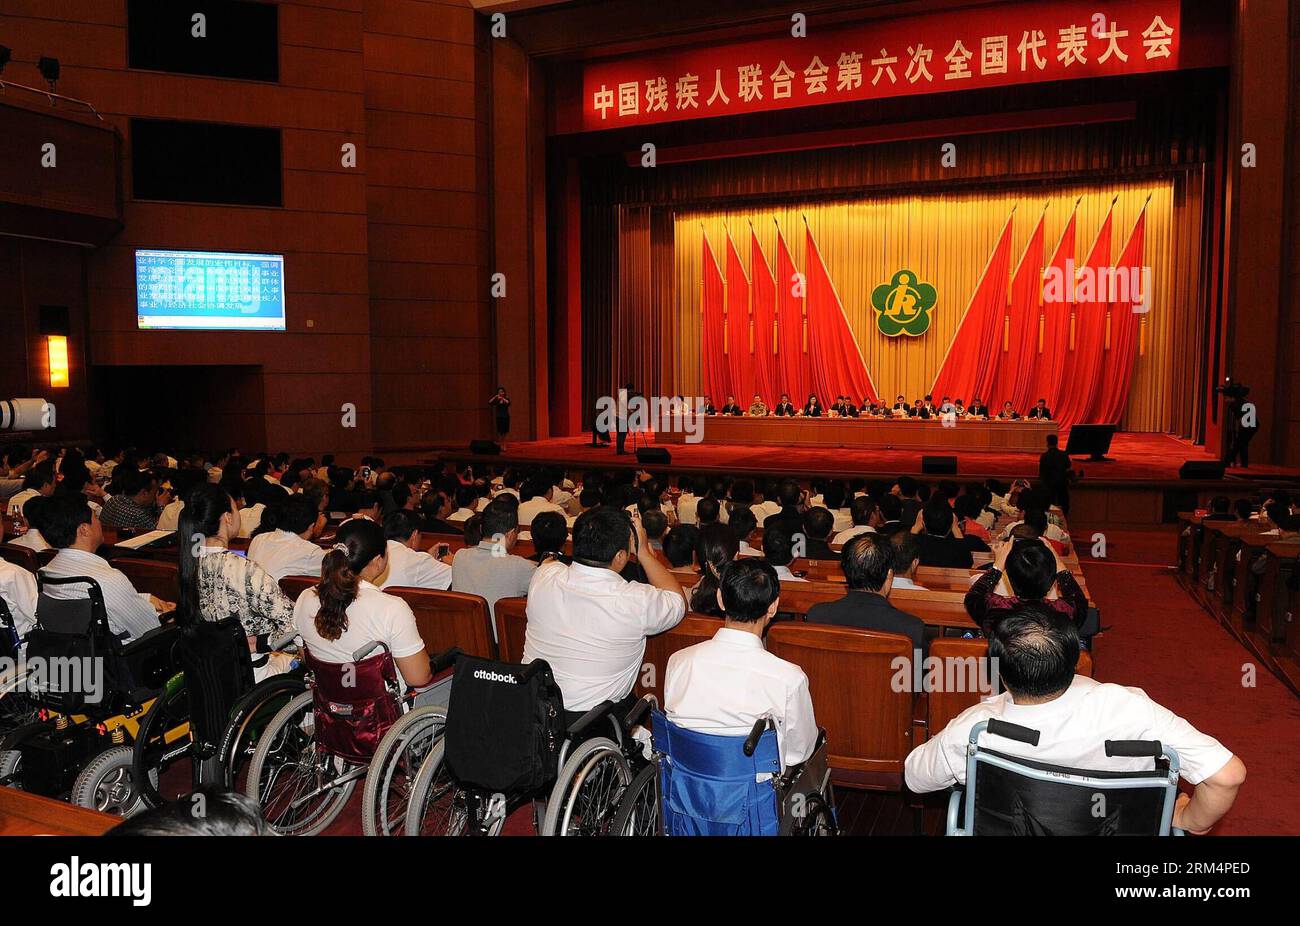 Bildnummer: 60498840  Datum: 19.09.2013  Copyright: imago/Xinhua (130919) -- BEIJING, Sept. 19, 2013 (Xinhua) -- The sixth national congress of the China Disabled Persons Federation (CDPF) is concluded in Beijing, capital of China, Sept. 19, 2013. Wheelchair-bound writer Zhang Haidi was reelected as chairwoman of the CDPF at the congress on Thursday. Deng Pufang was reelected as the CDPF s honorable chairman. (Xinhua/He Junchang) (wqq) CHINA-BEIJING-DISABLED PERSONS FEDERATION-NATIONAL CONGRESS (CN) PUBLICATIONxNOTxINxCHN xcb x0x 2013 quer      60498840 Date 19 09 2013 Copyright Imago XINHUA Stock Photo